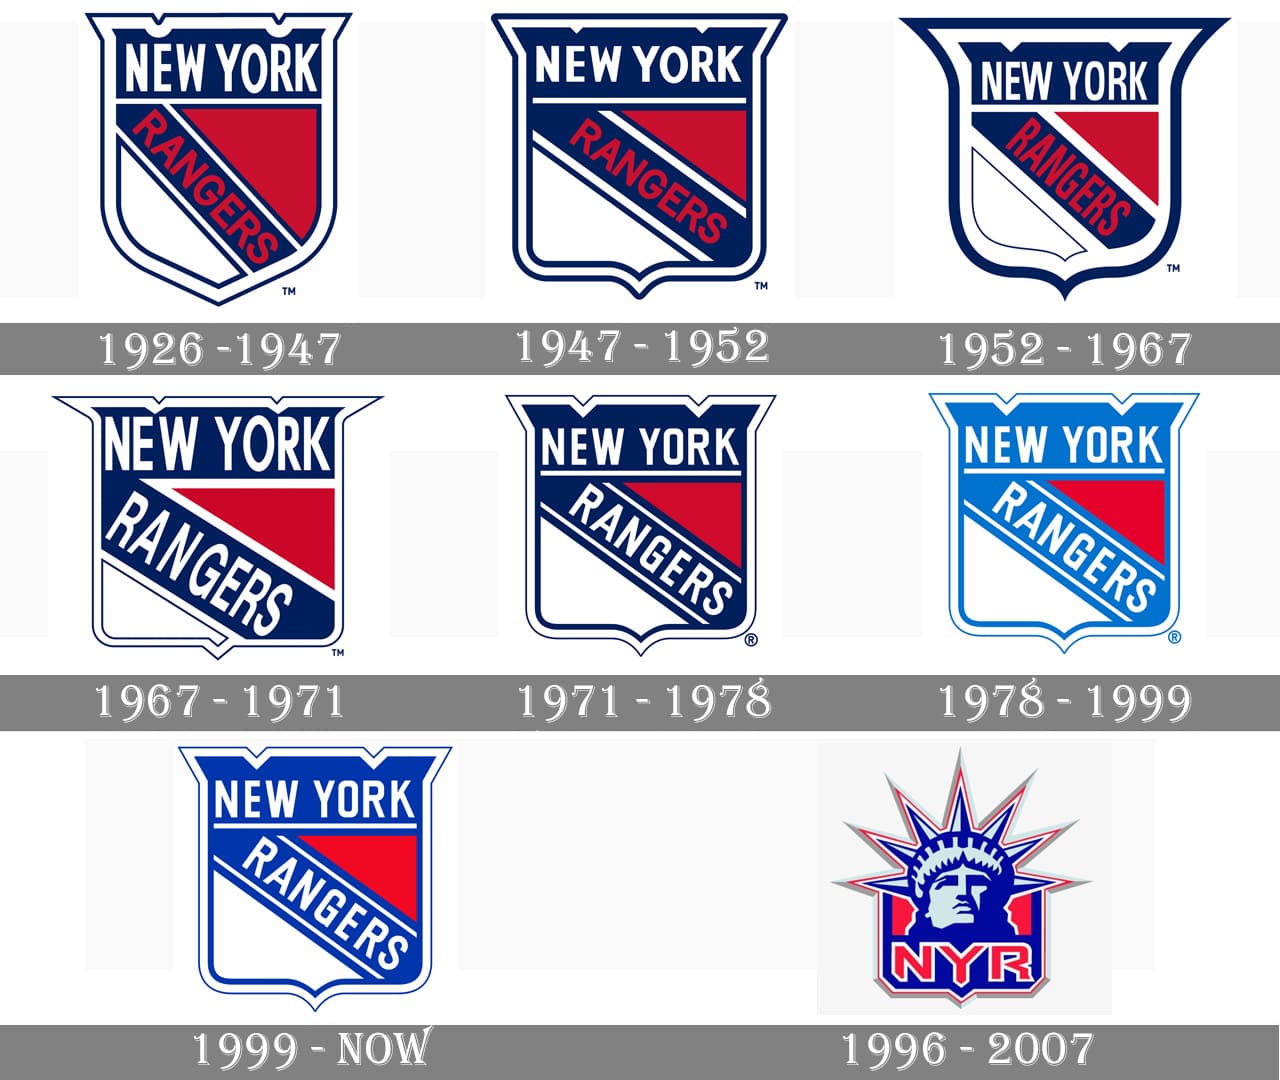 New York Rangers on X: The emblem of freedom, our city and our